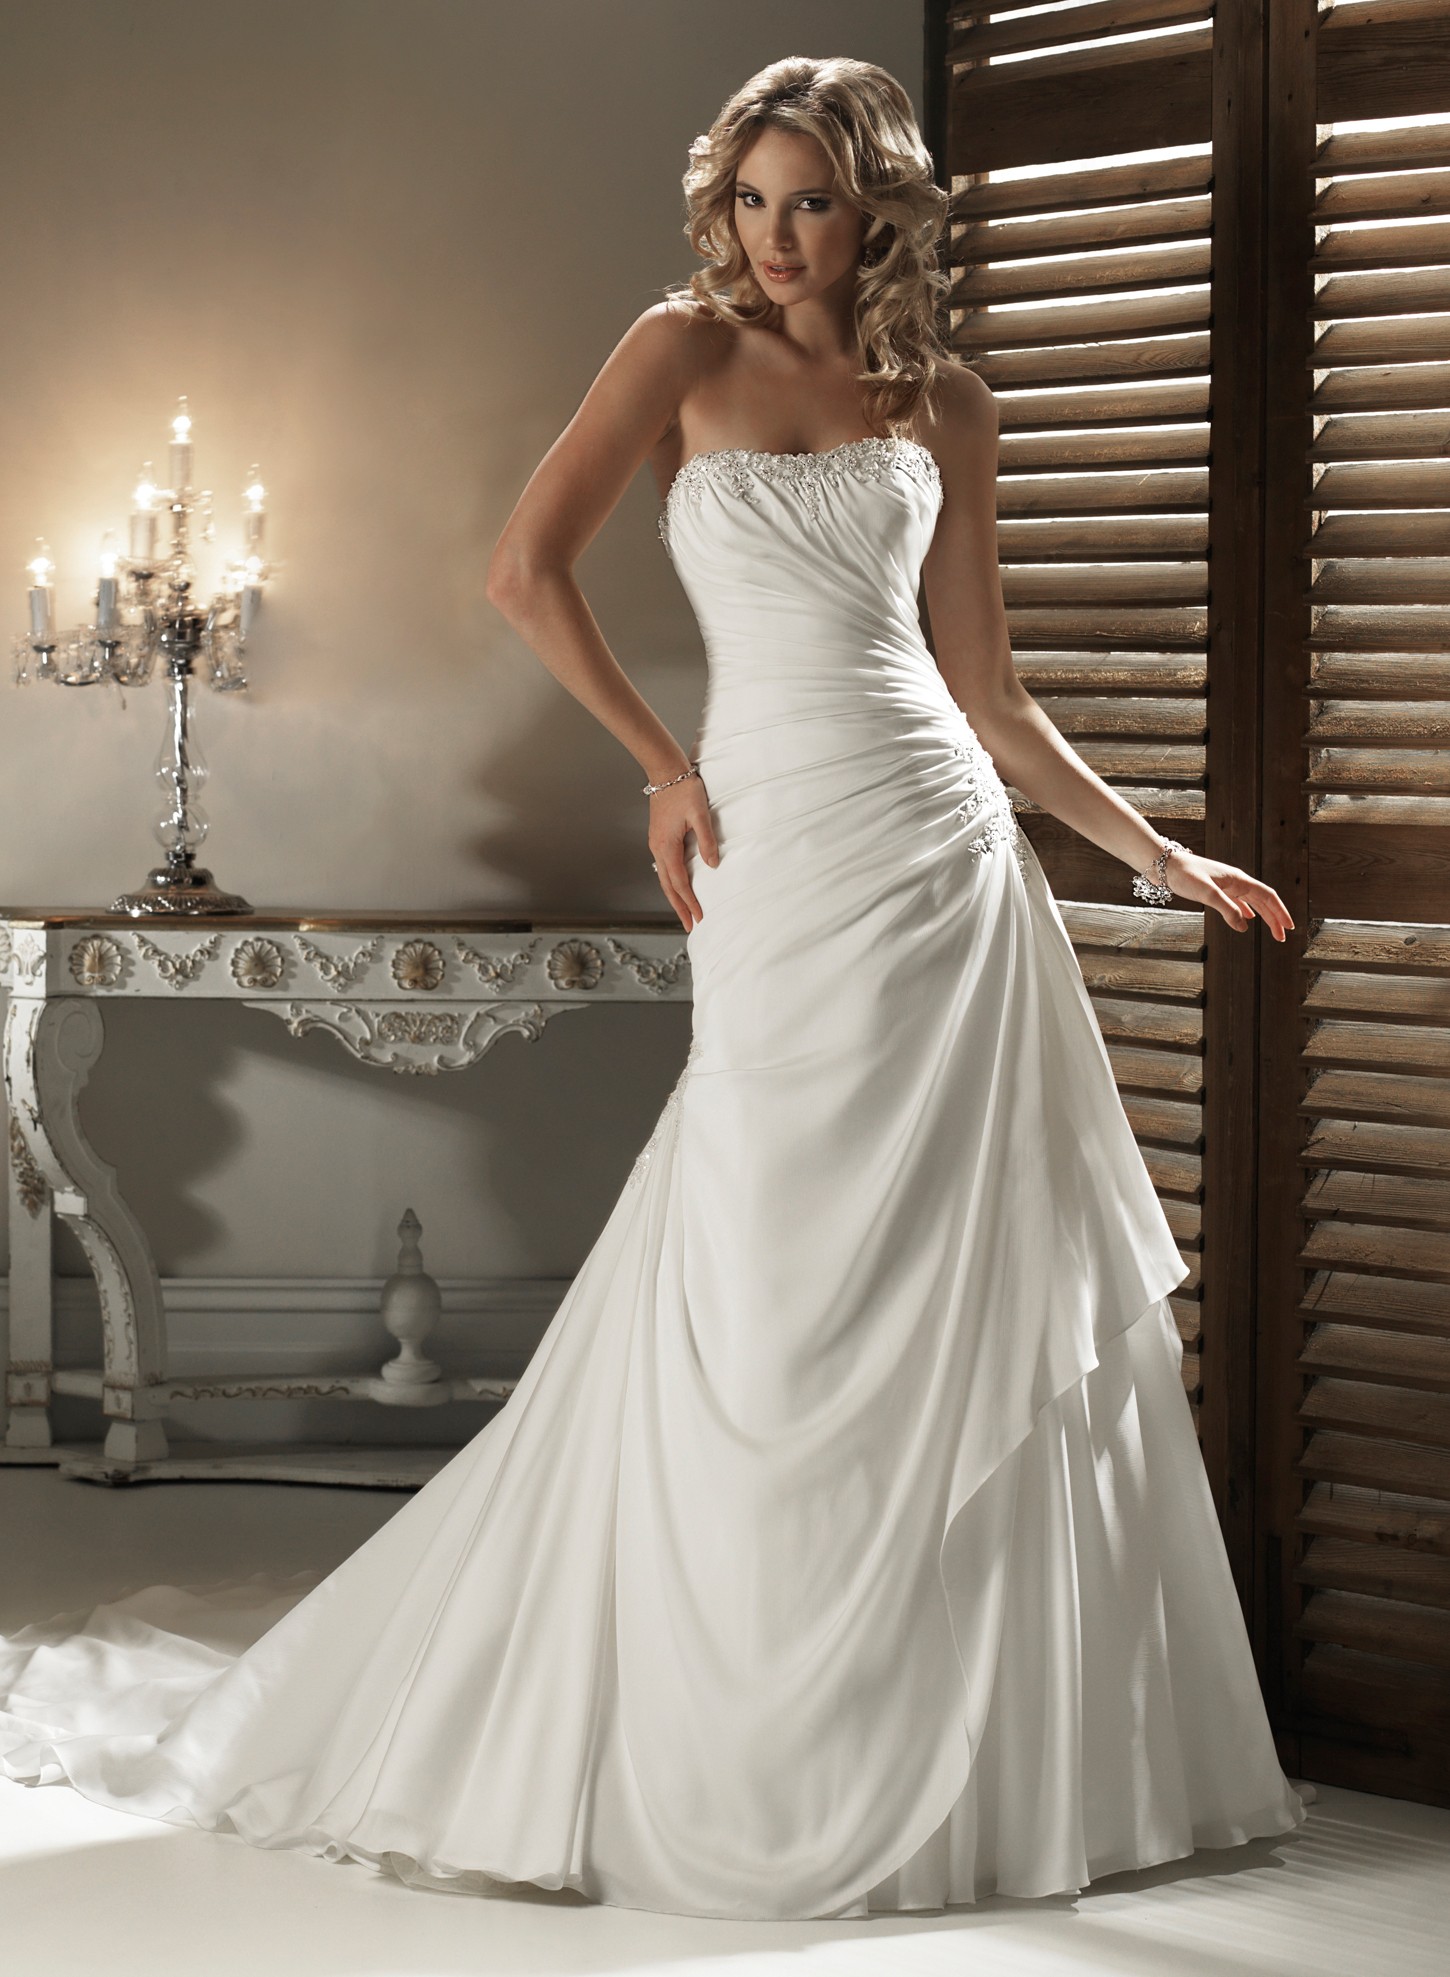 Amazing A Line Dress Wedding in the world Check it out now 